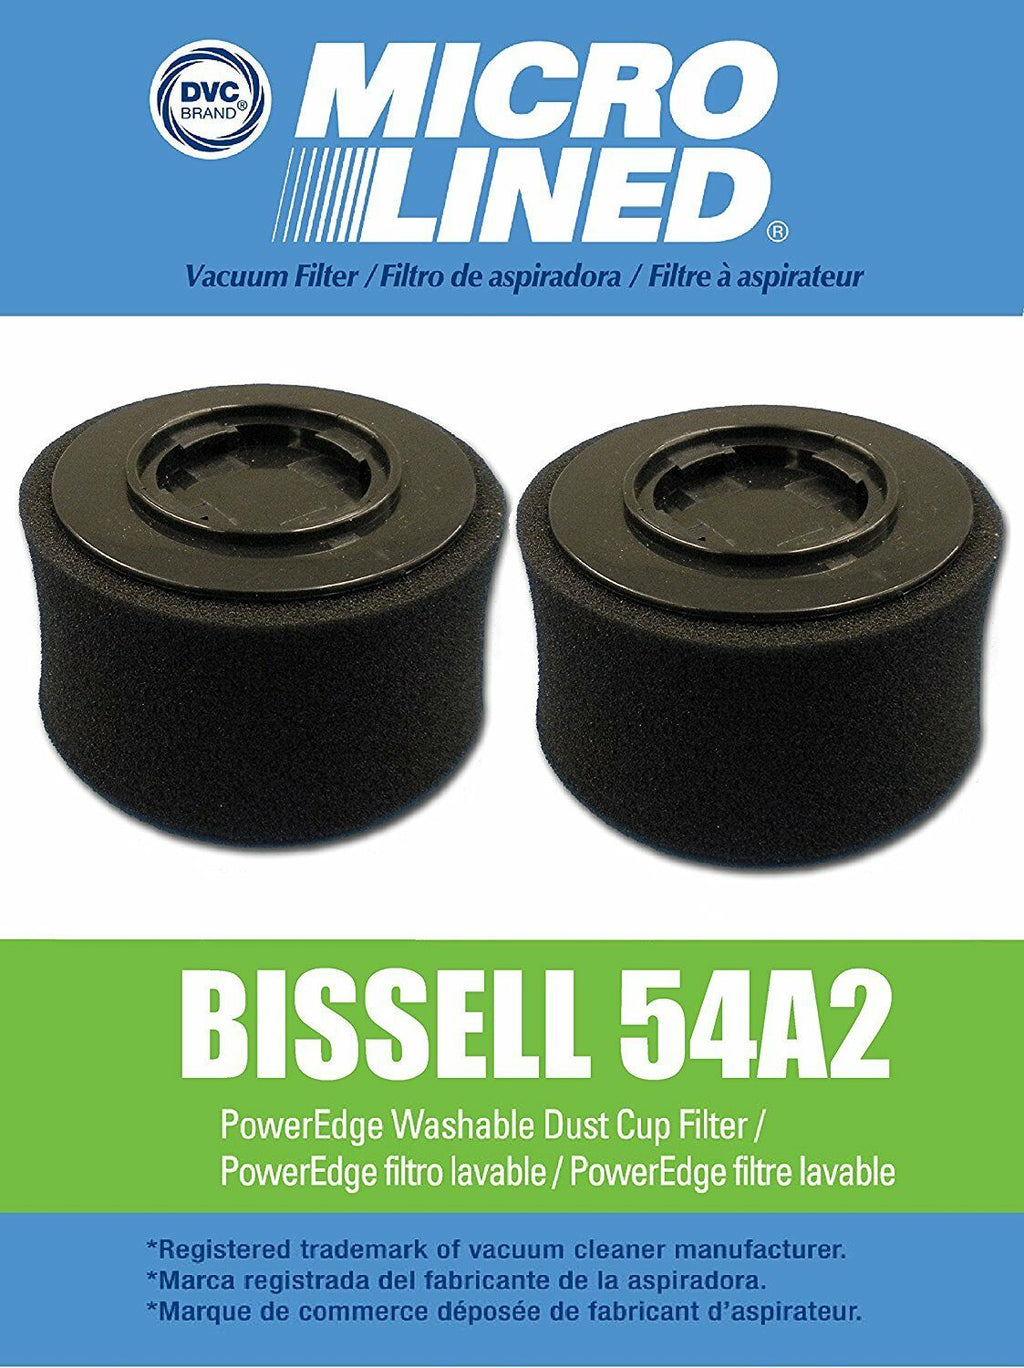 Bissell HEPA Cartridge and Outer Foam Filter Repl. OEM 54A2 fits model 81L2 Generic Part br-1808, 413809